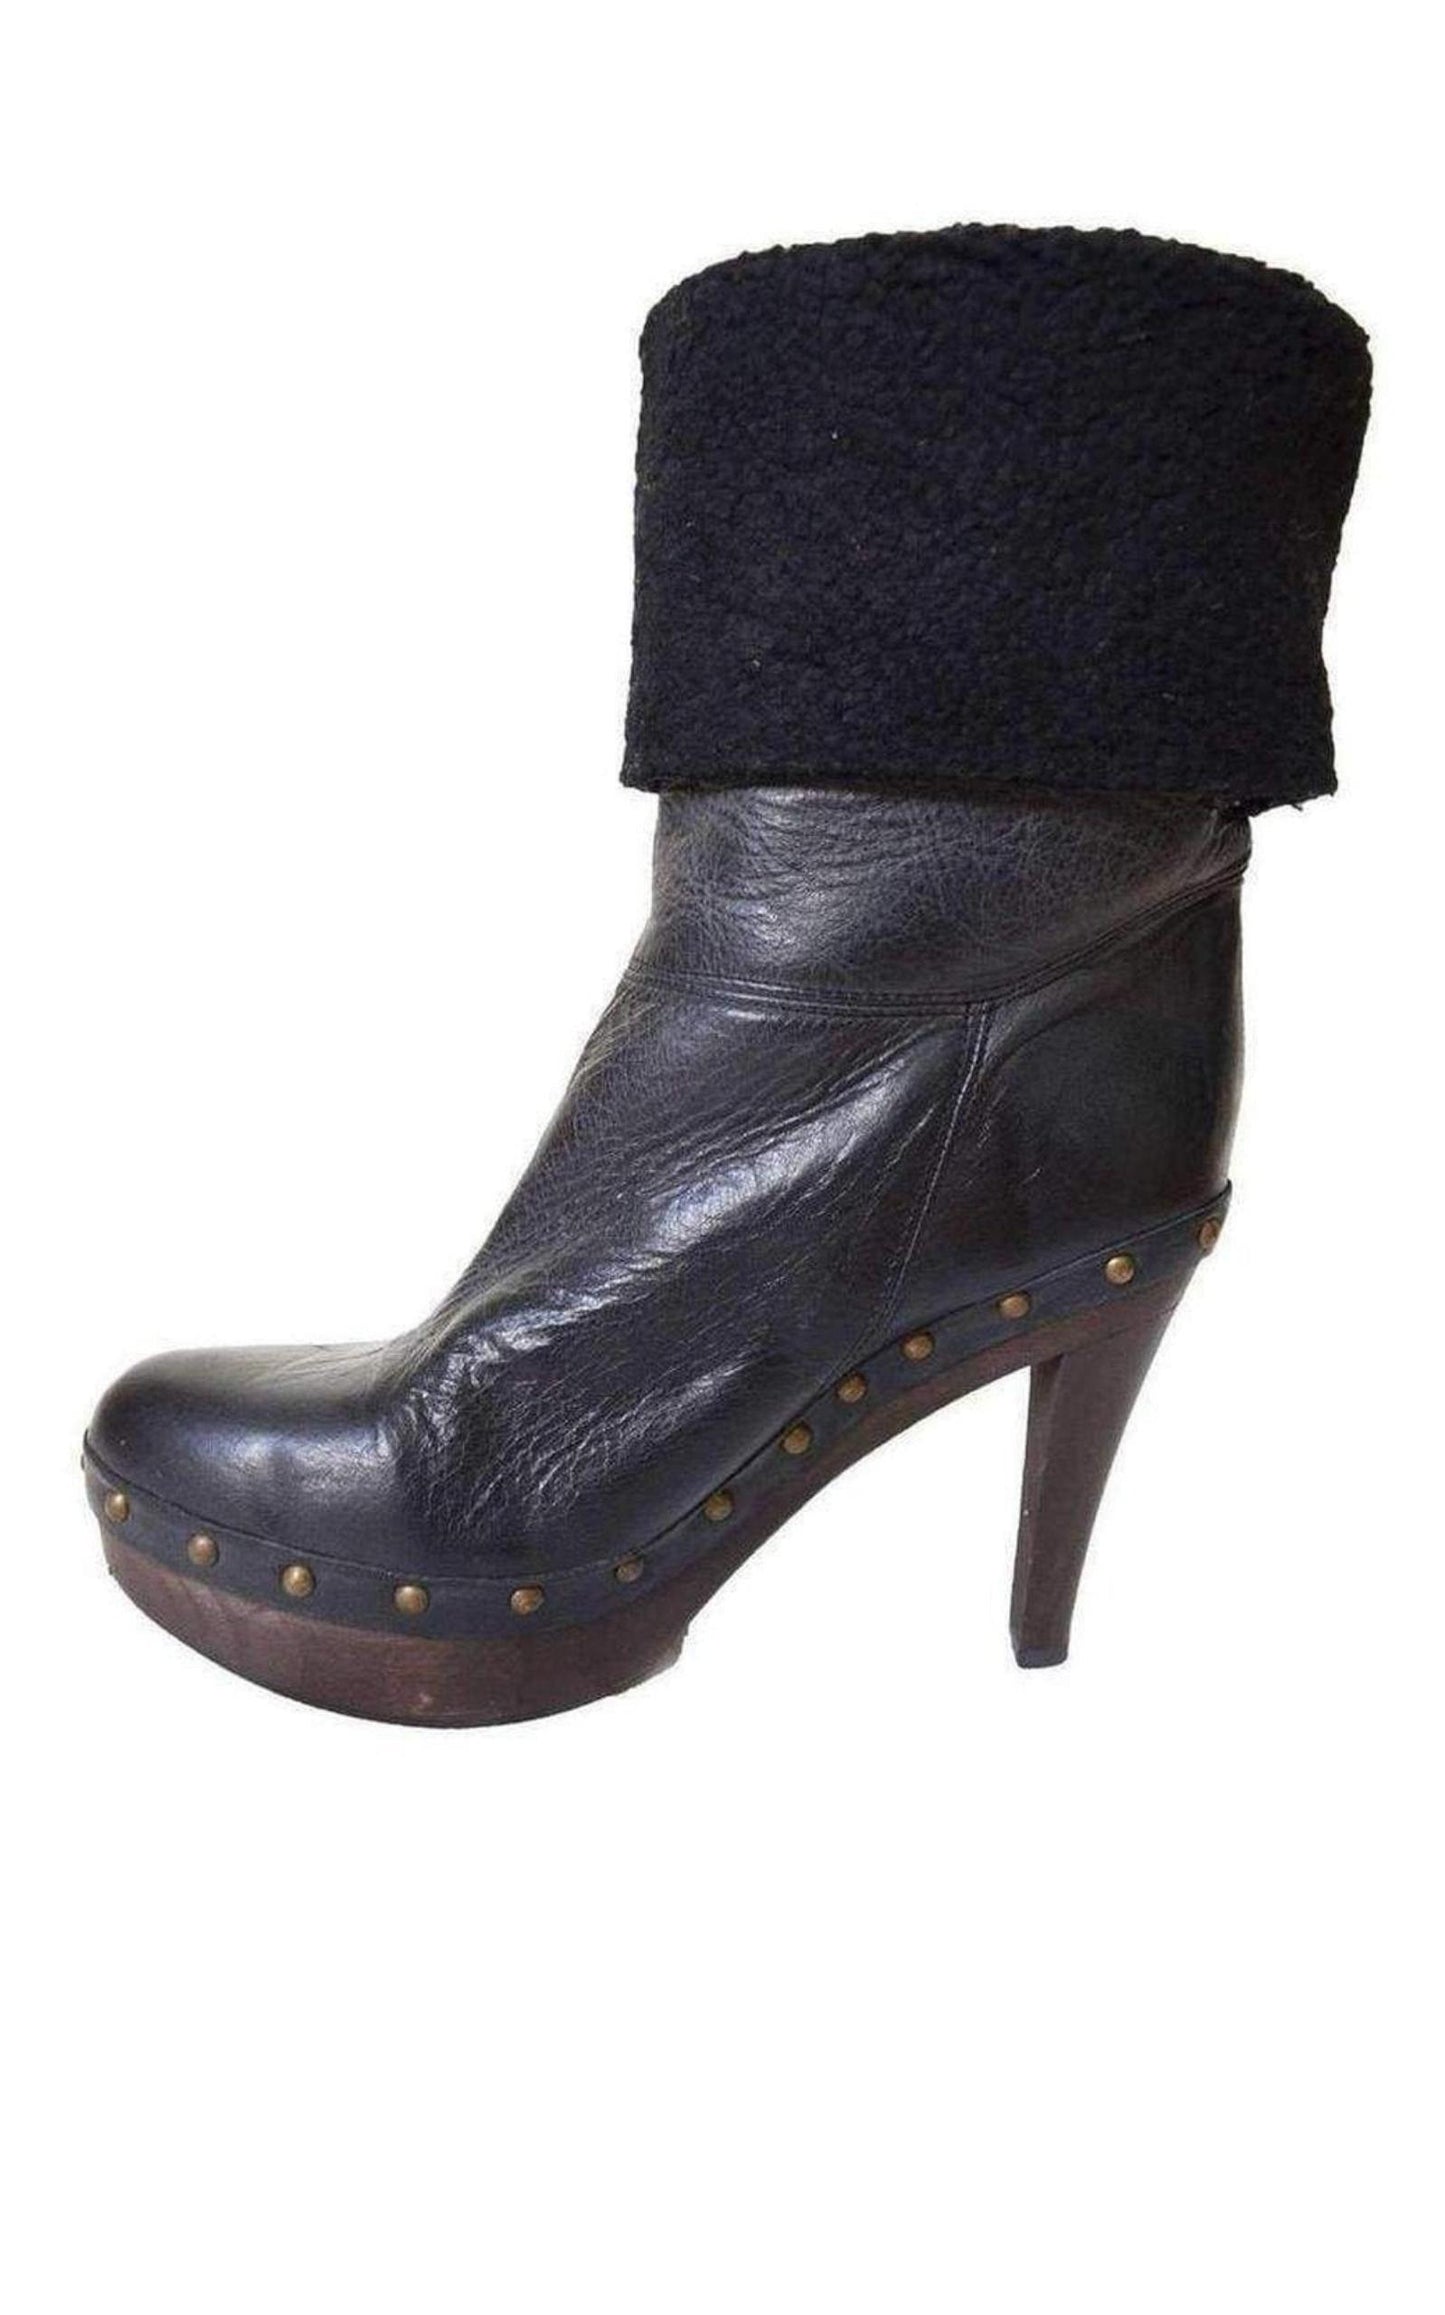  Paloma BarceloBlack Leather Boots - Runway Catalog